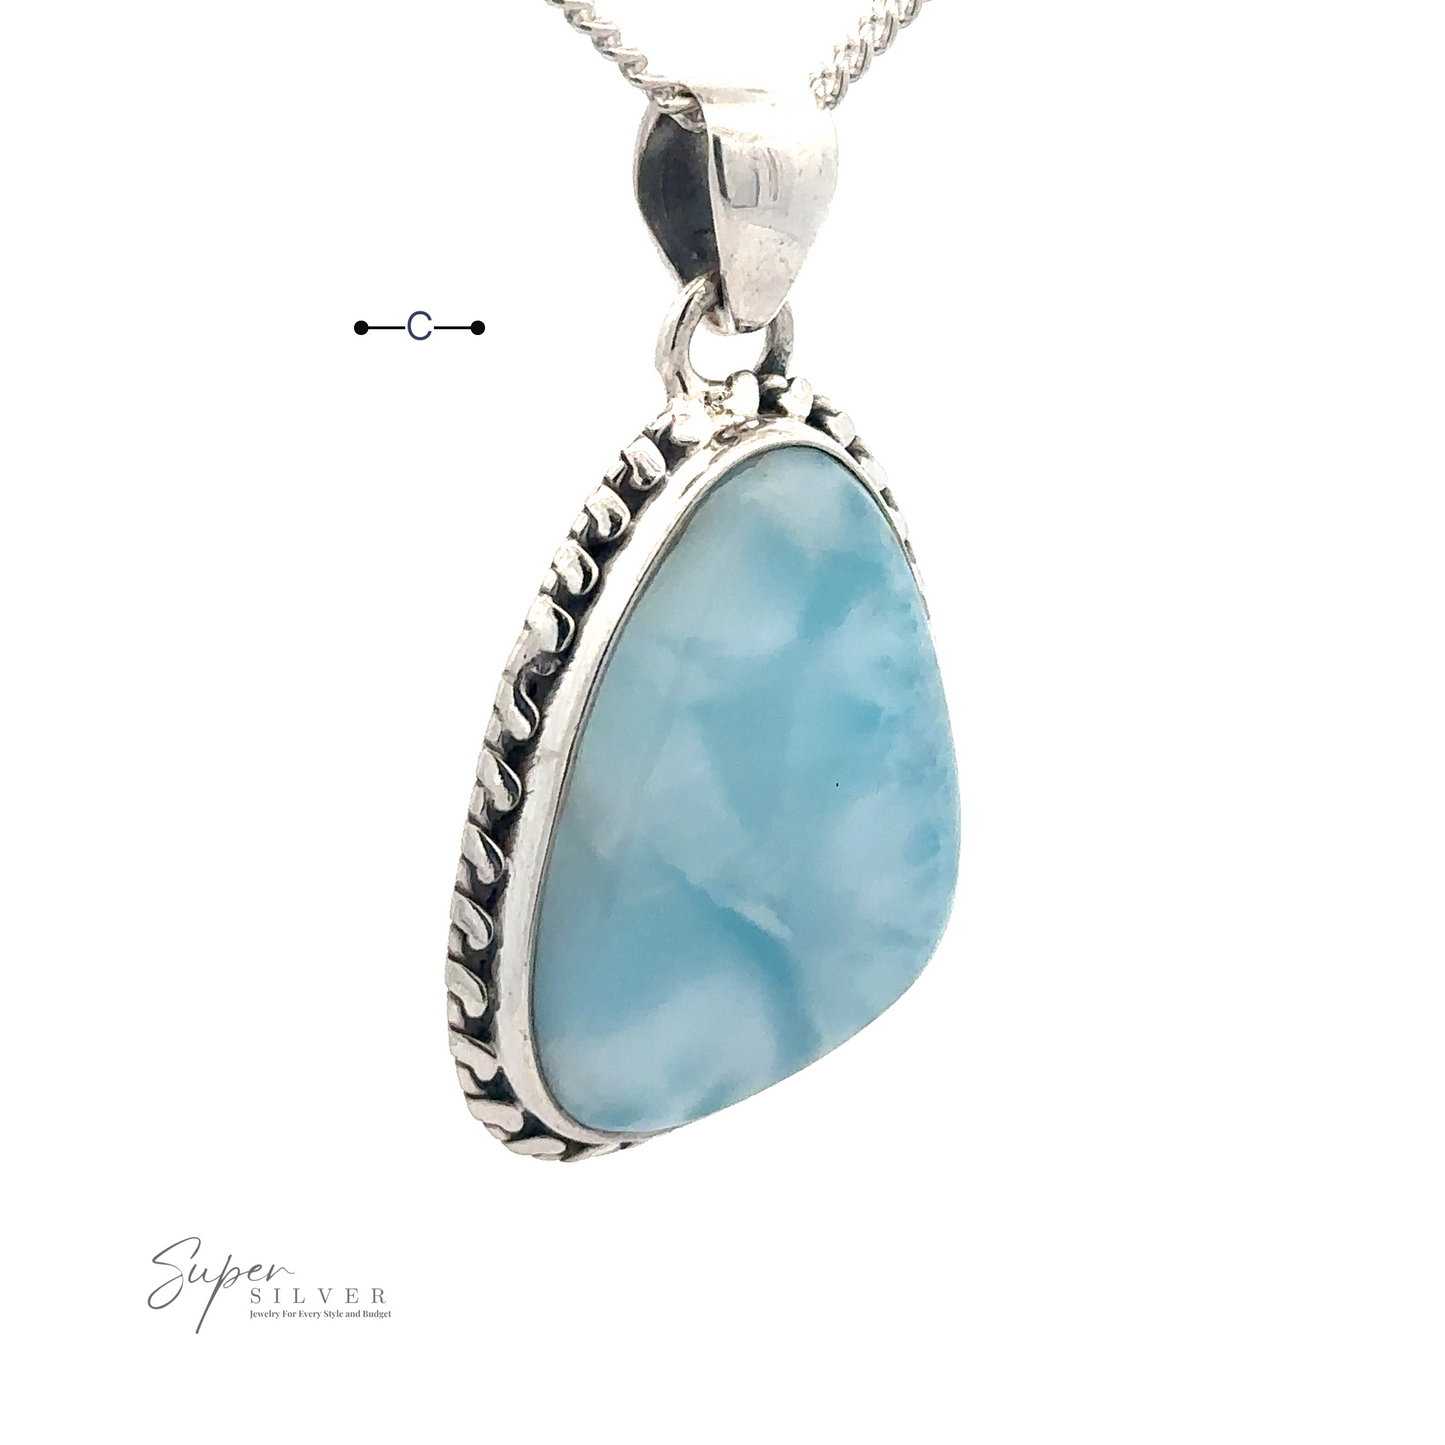 
                  
                    A close-up of a Larimar Pendant with Decorated Border featuring a stunning Larimar gemstone set in a decorative .925 Sterling Silver frame, hanging from a delicate silver chain. The background is white with the "Super Silver" logo visible in the lower left corner. Chain not included.
                  
                